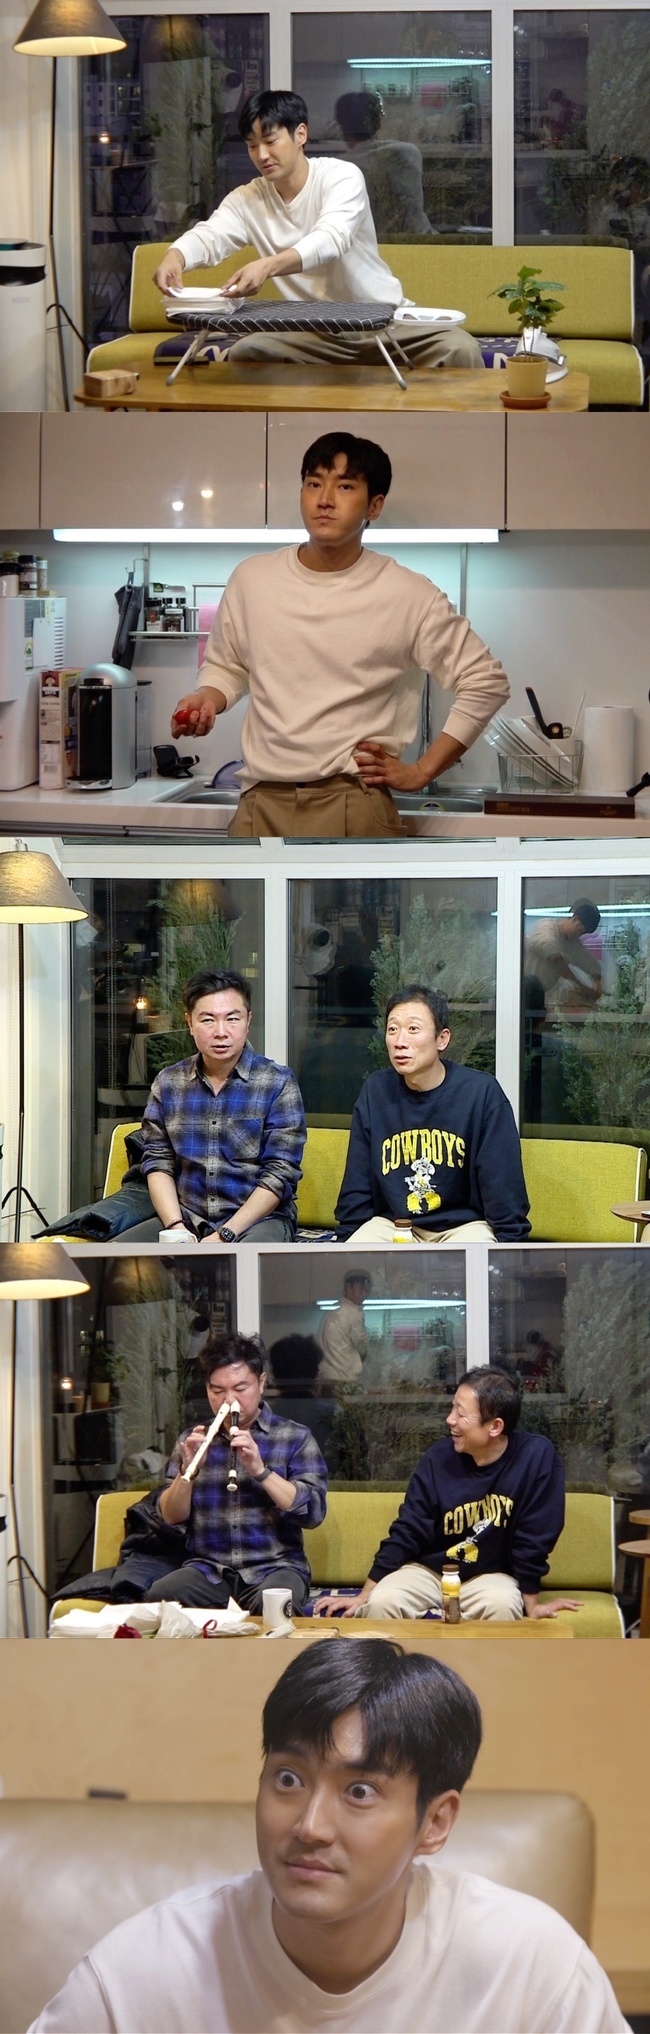 Actor Seak-yong Jing Confessions DevotionChoi Siwons daily life is unfolded on SBS My Little Old Boy which is broadcasted on December 19th.In addition, Im Won-hee X Seok-yong Jeong, who was invited to Choi Siwon House, and a super-class laugh chemistry will be proud.In recent recordings, Choi Siwon, who is doing housework, was attracted to the scene in the movie.Choi Siwon also showed his unique manners on the way to the separate collection in front of the house, and caused a laugh by carefully ironing the attachment white handkerchief.In addition, Choi Siwon House, who came to play with the salty brothers, Im Won-hee & Seak-yong Jing I can not cook but I have a touch, he boasted unfounded confidence.In particular, Choi Siwon surprised the Bengers with a new cool vibration cooking that I have never seen before.But the surprise was not the end here: the 52-year-old unmarried Seok-yong Jeong surprised the devotion, saying, There is someone I meet now.Choi Siwon handed the storm celebration with a unique Hollywood reaction, while Won Hee was in a big shock.In addition, Im Won-hee, who was excited to practice his personal life, said that his face was hardened and he stopped playing.